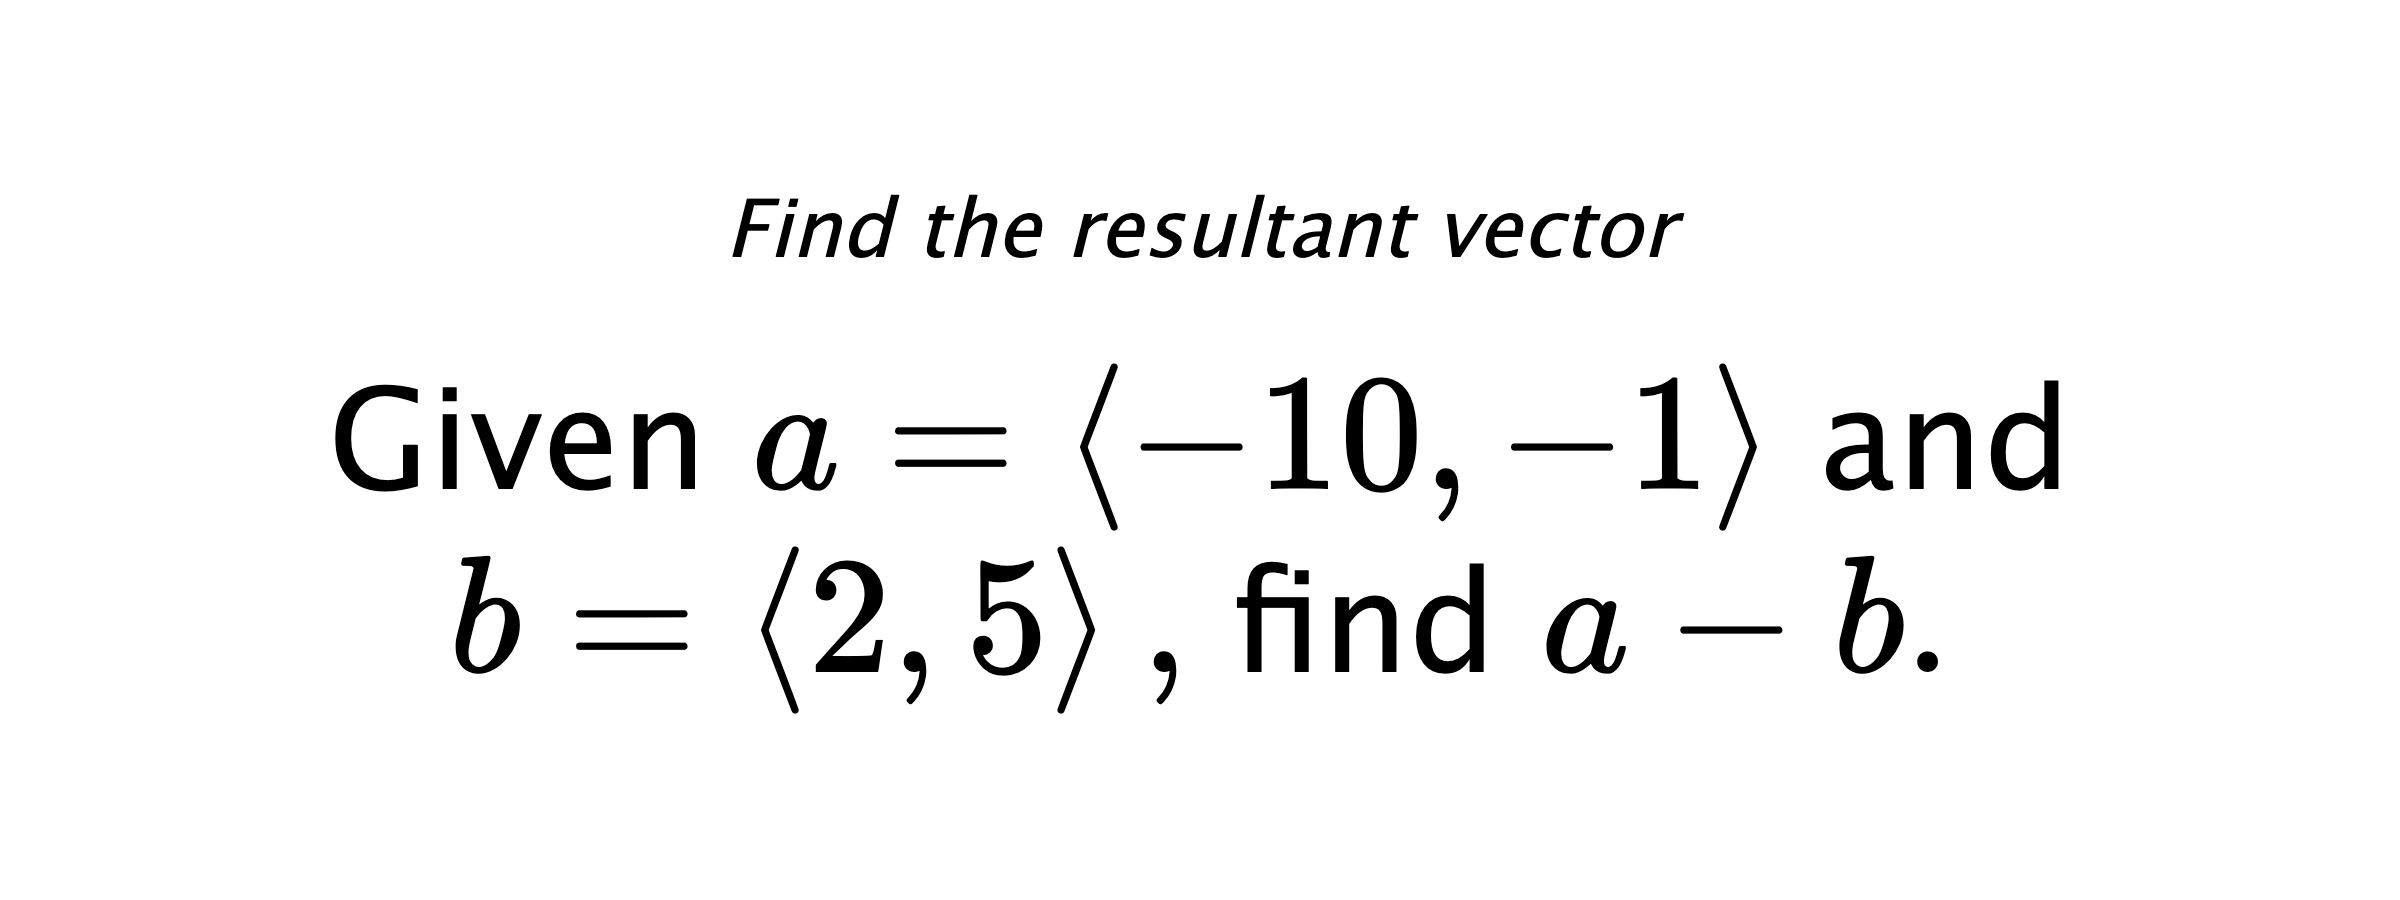 Find the resultant vector Given $ a = \left< -10,-1 \right> $ and $ b = \left< 2,5 \right> ,$ find $ a-b .$